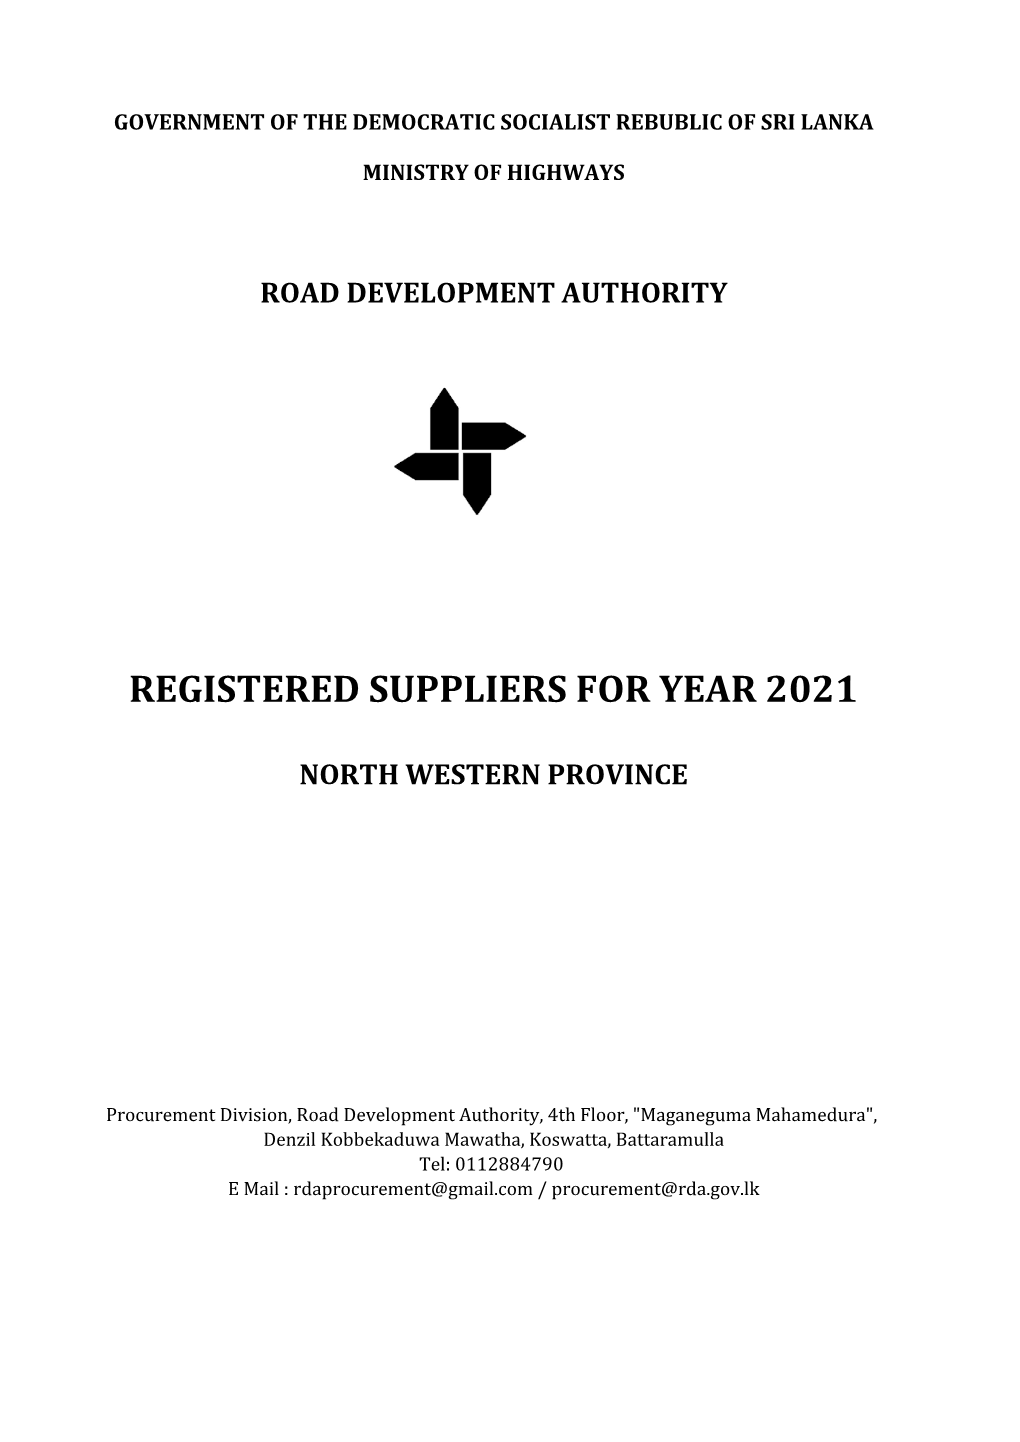 Registered Suppliers for Year 2021